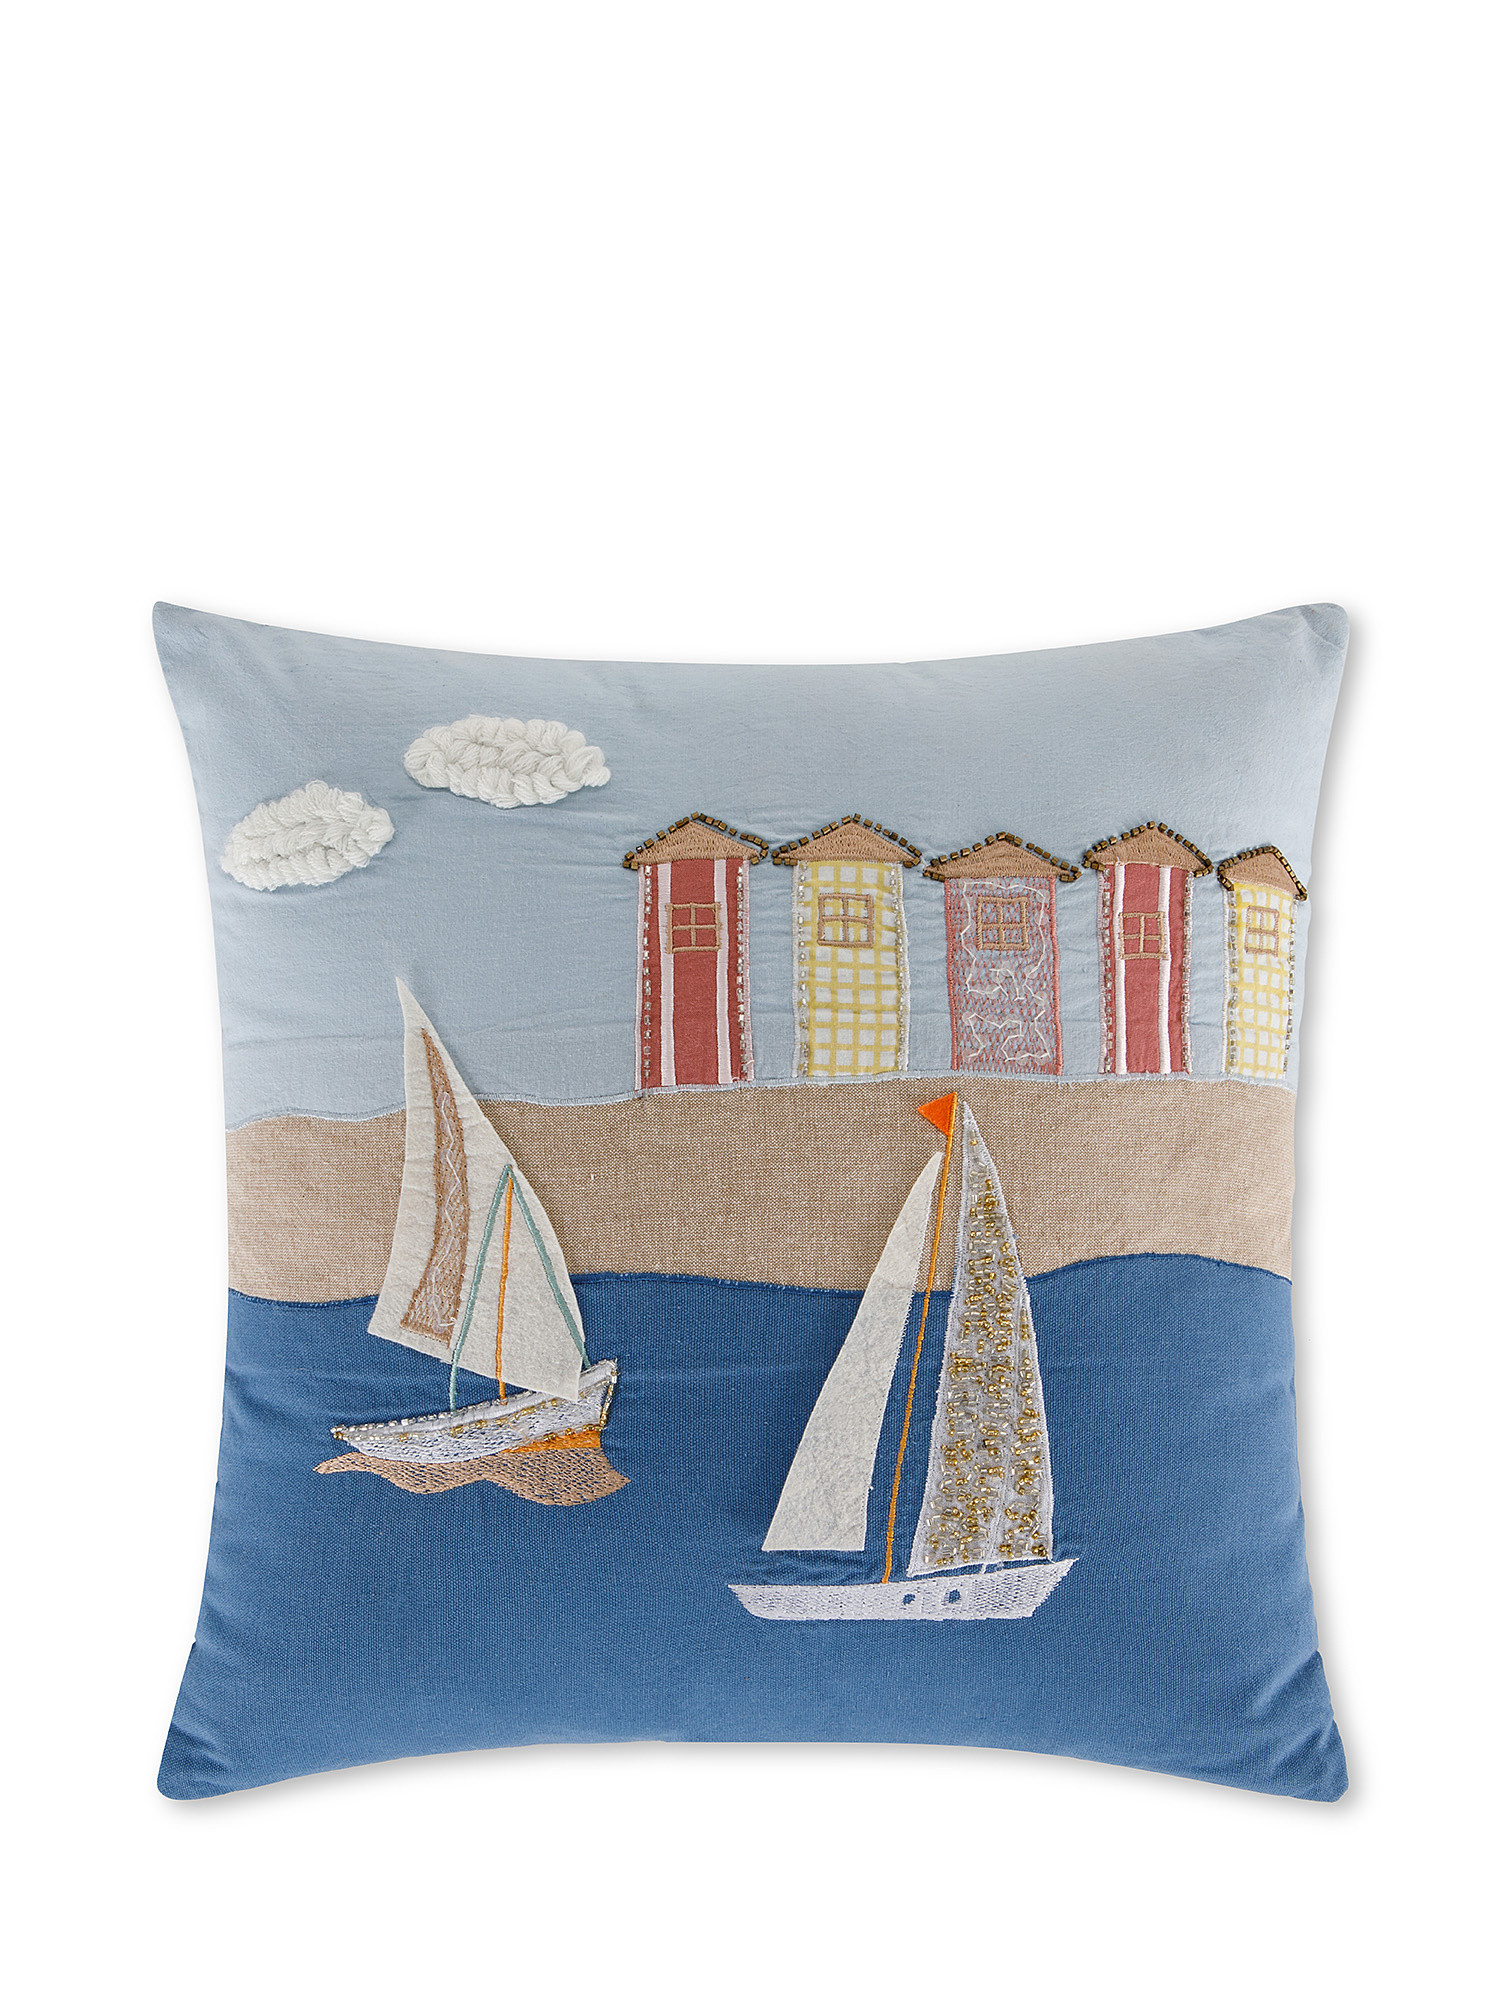 Cuscino embroidery boats 45x45cm, Light Blue, large image number 0